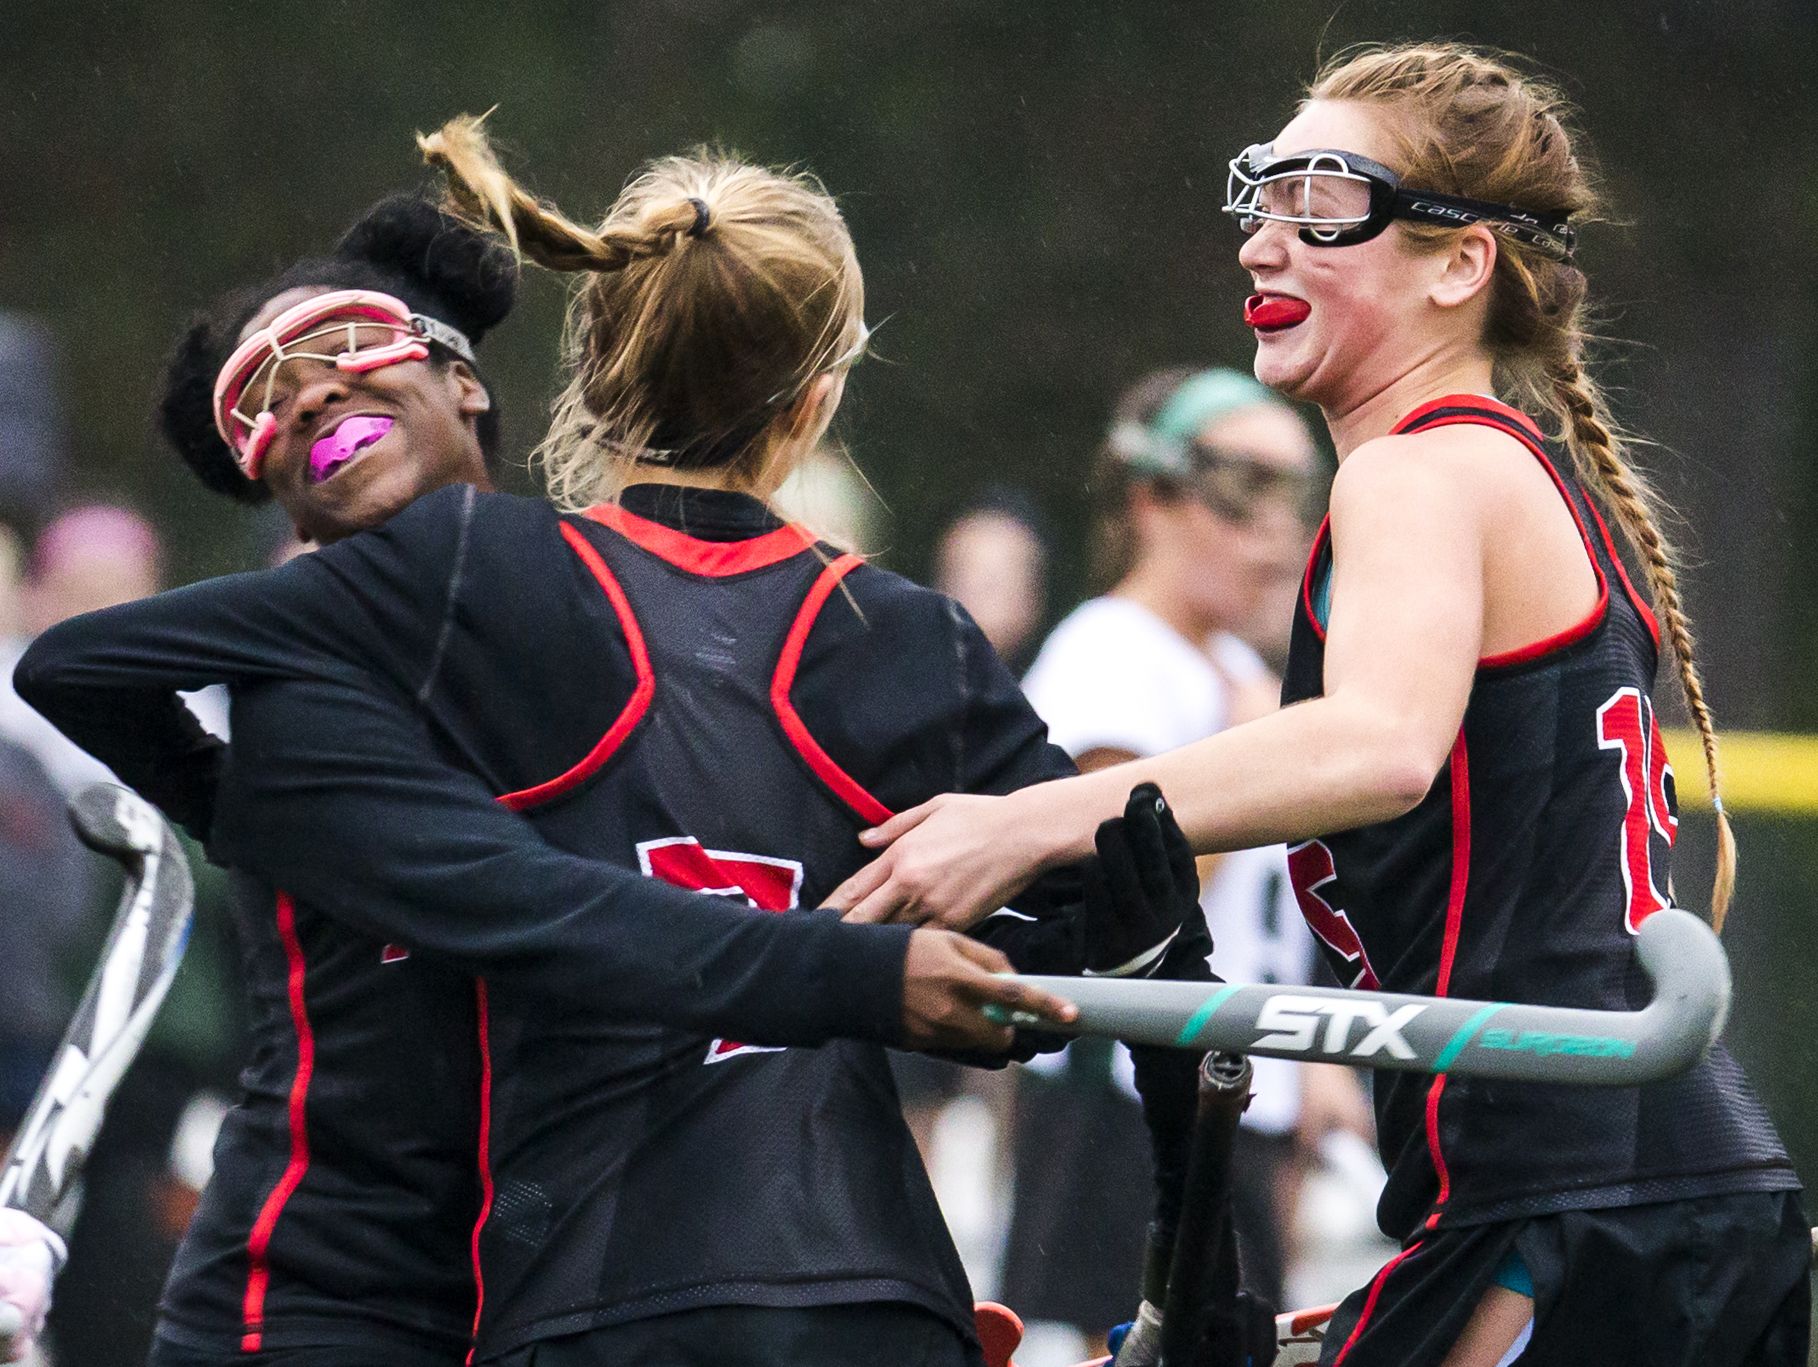 Polytech's Jennah Morris (left), Lacy Bayley (center) and Grace Stang (right) celebrate a goal in the first half of Polytech's 1-0 win over Archmere at Archmere Academy in their DIAA playoff game on Wednesday afternoon.